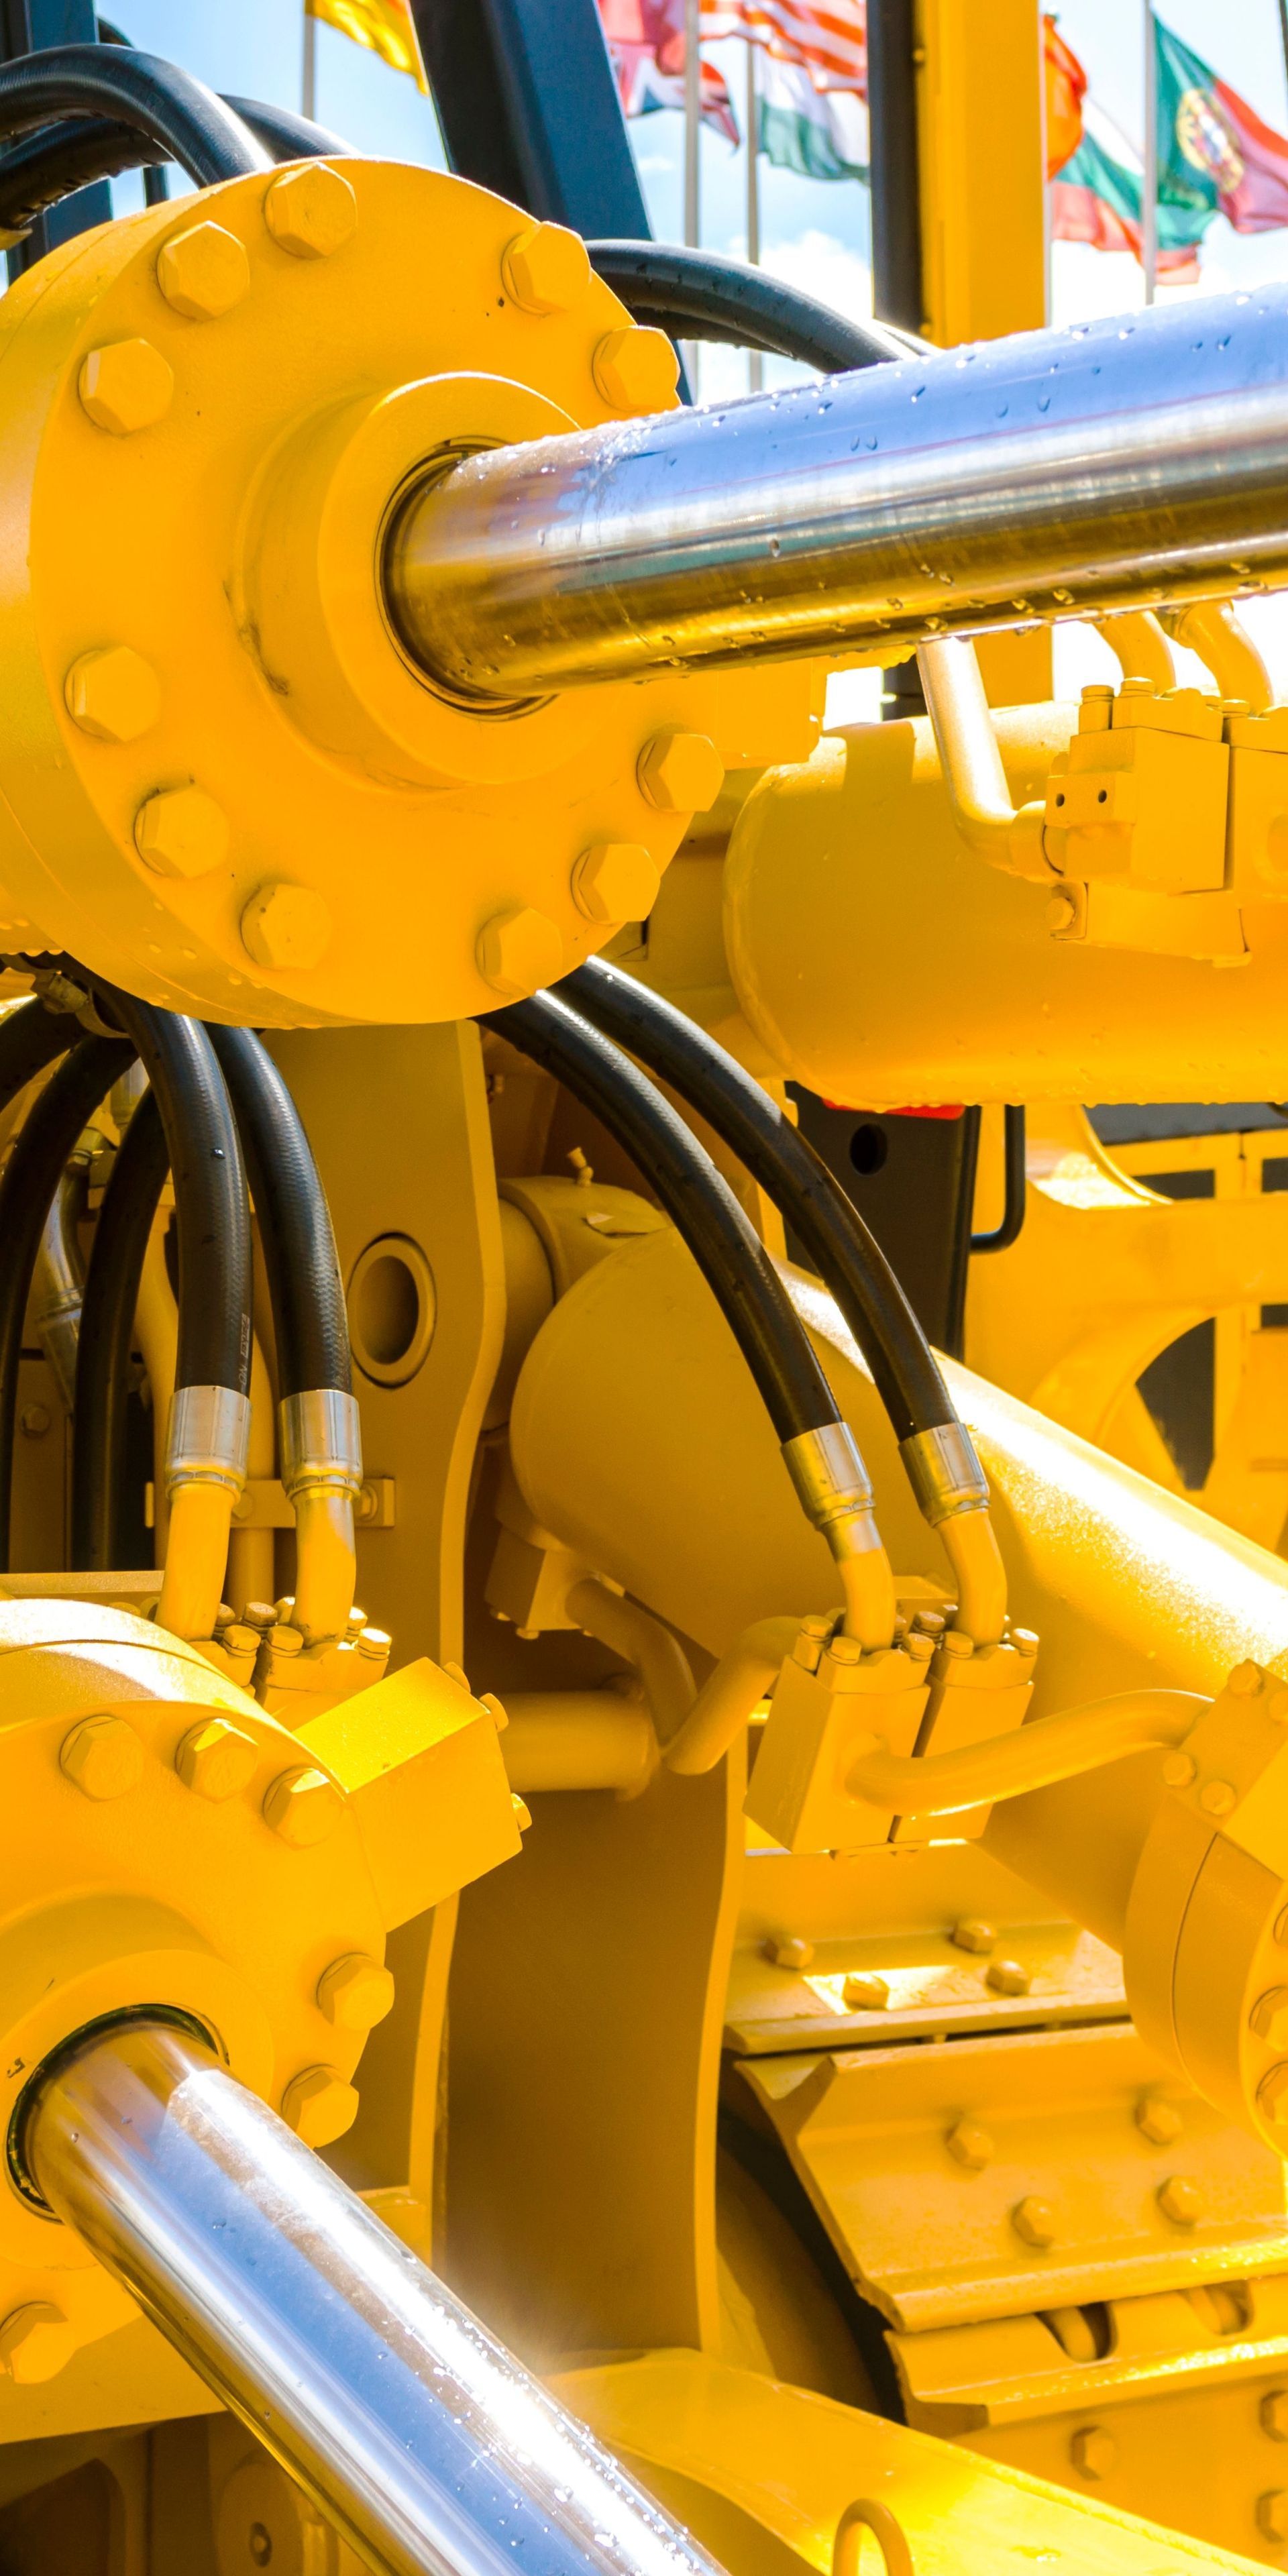 A close up of a yellow hydraulic system.